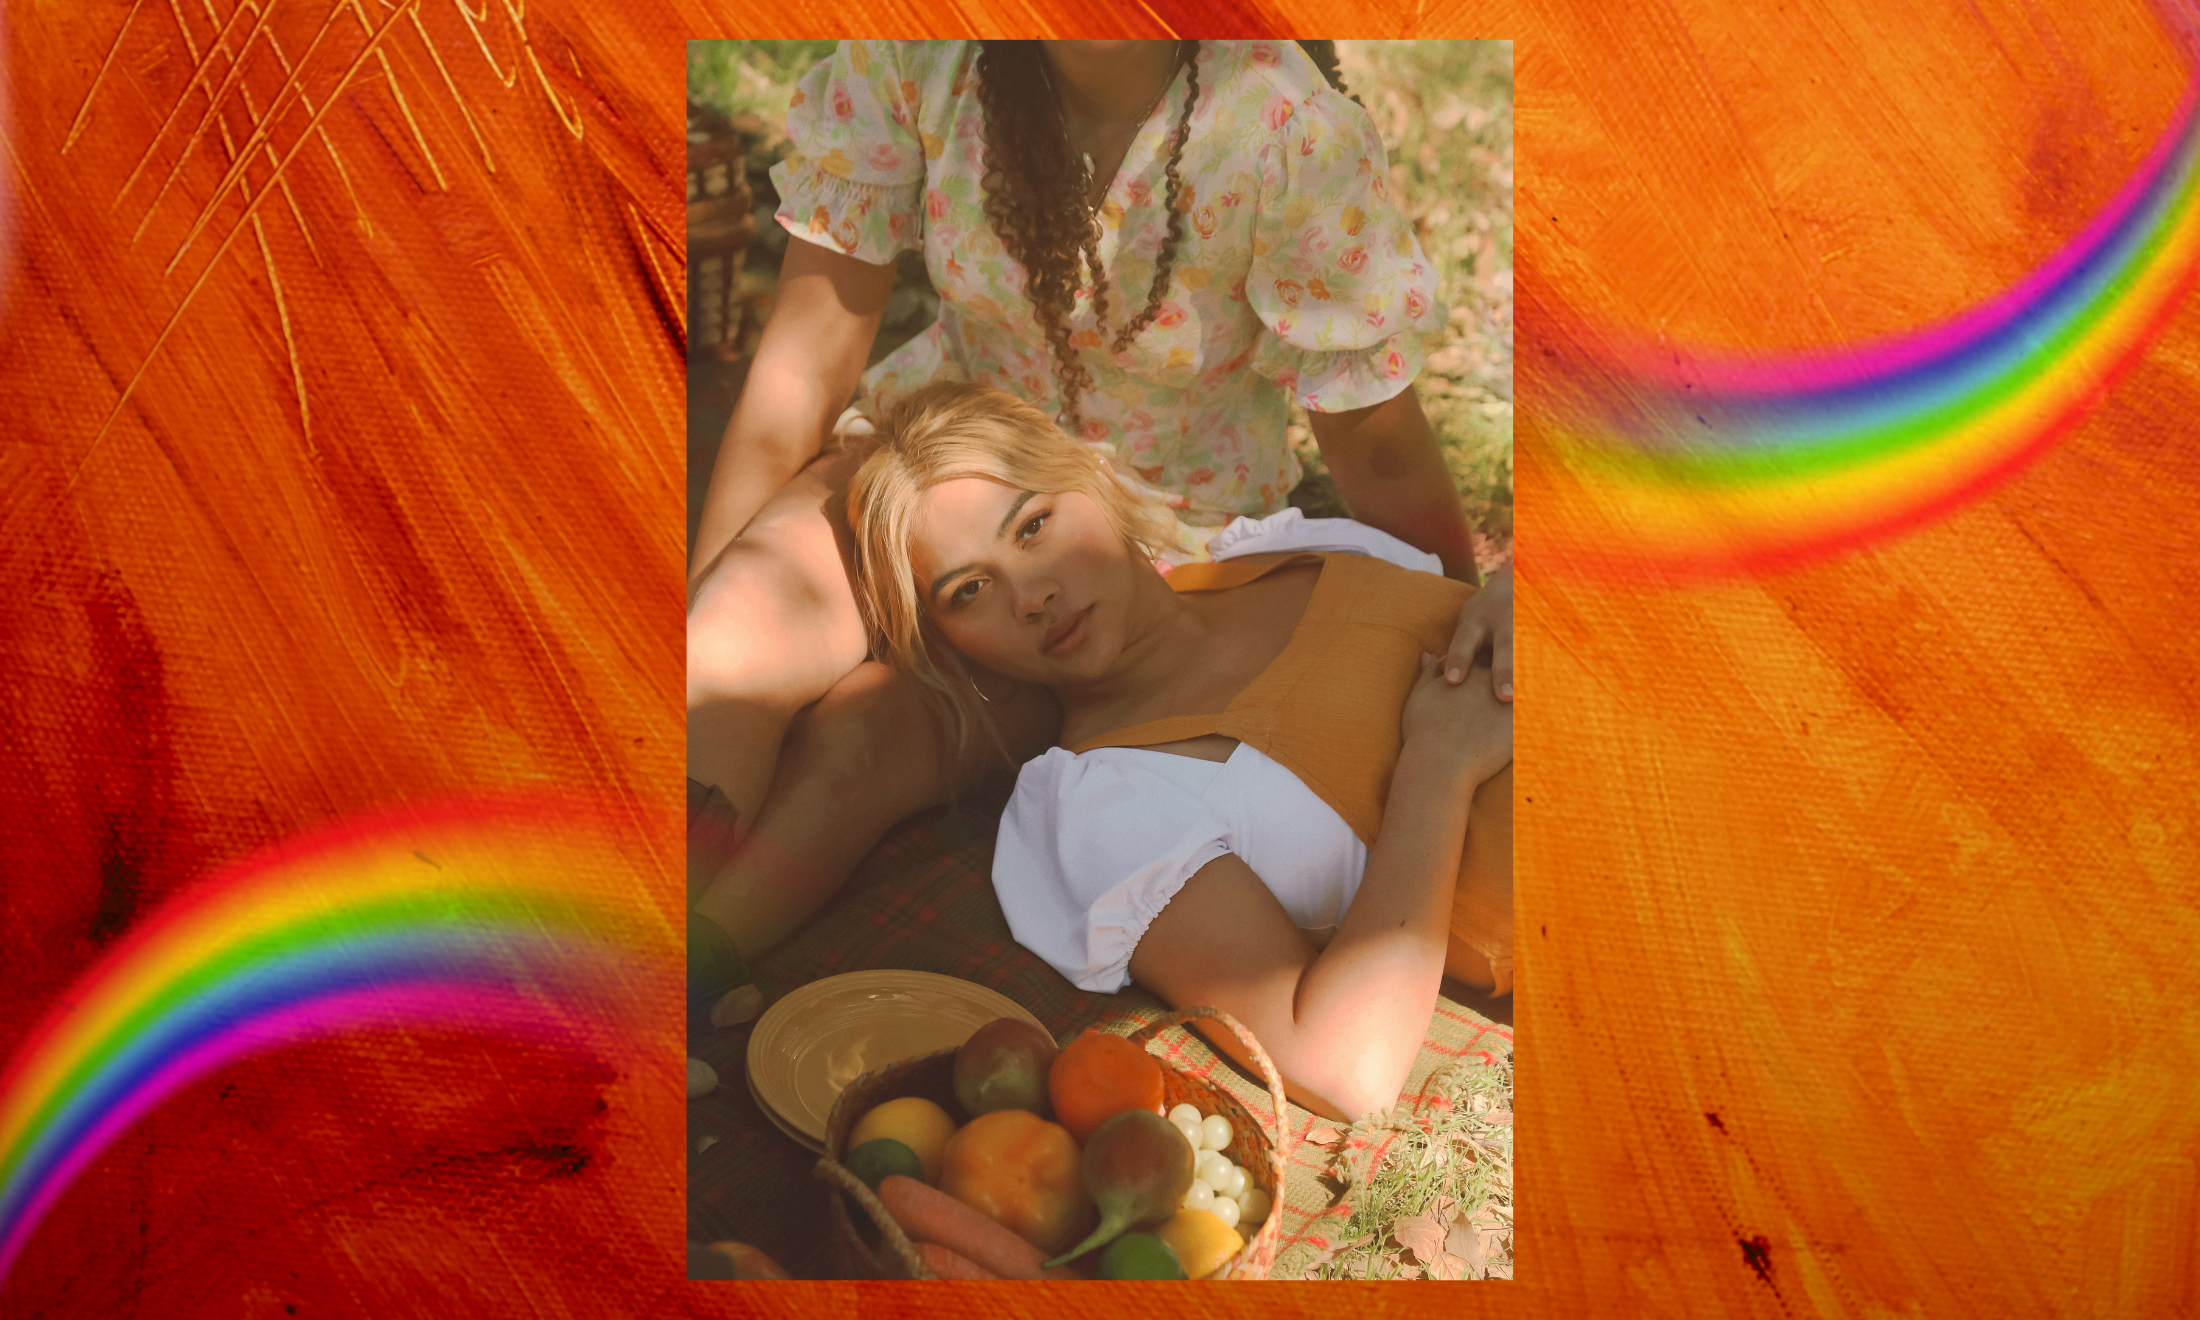 Five On It: on ‘Chance’, Hayley Kiyoko reinforces the need for joy during Pride and beyond